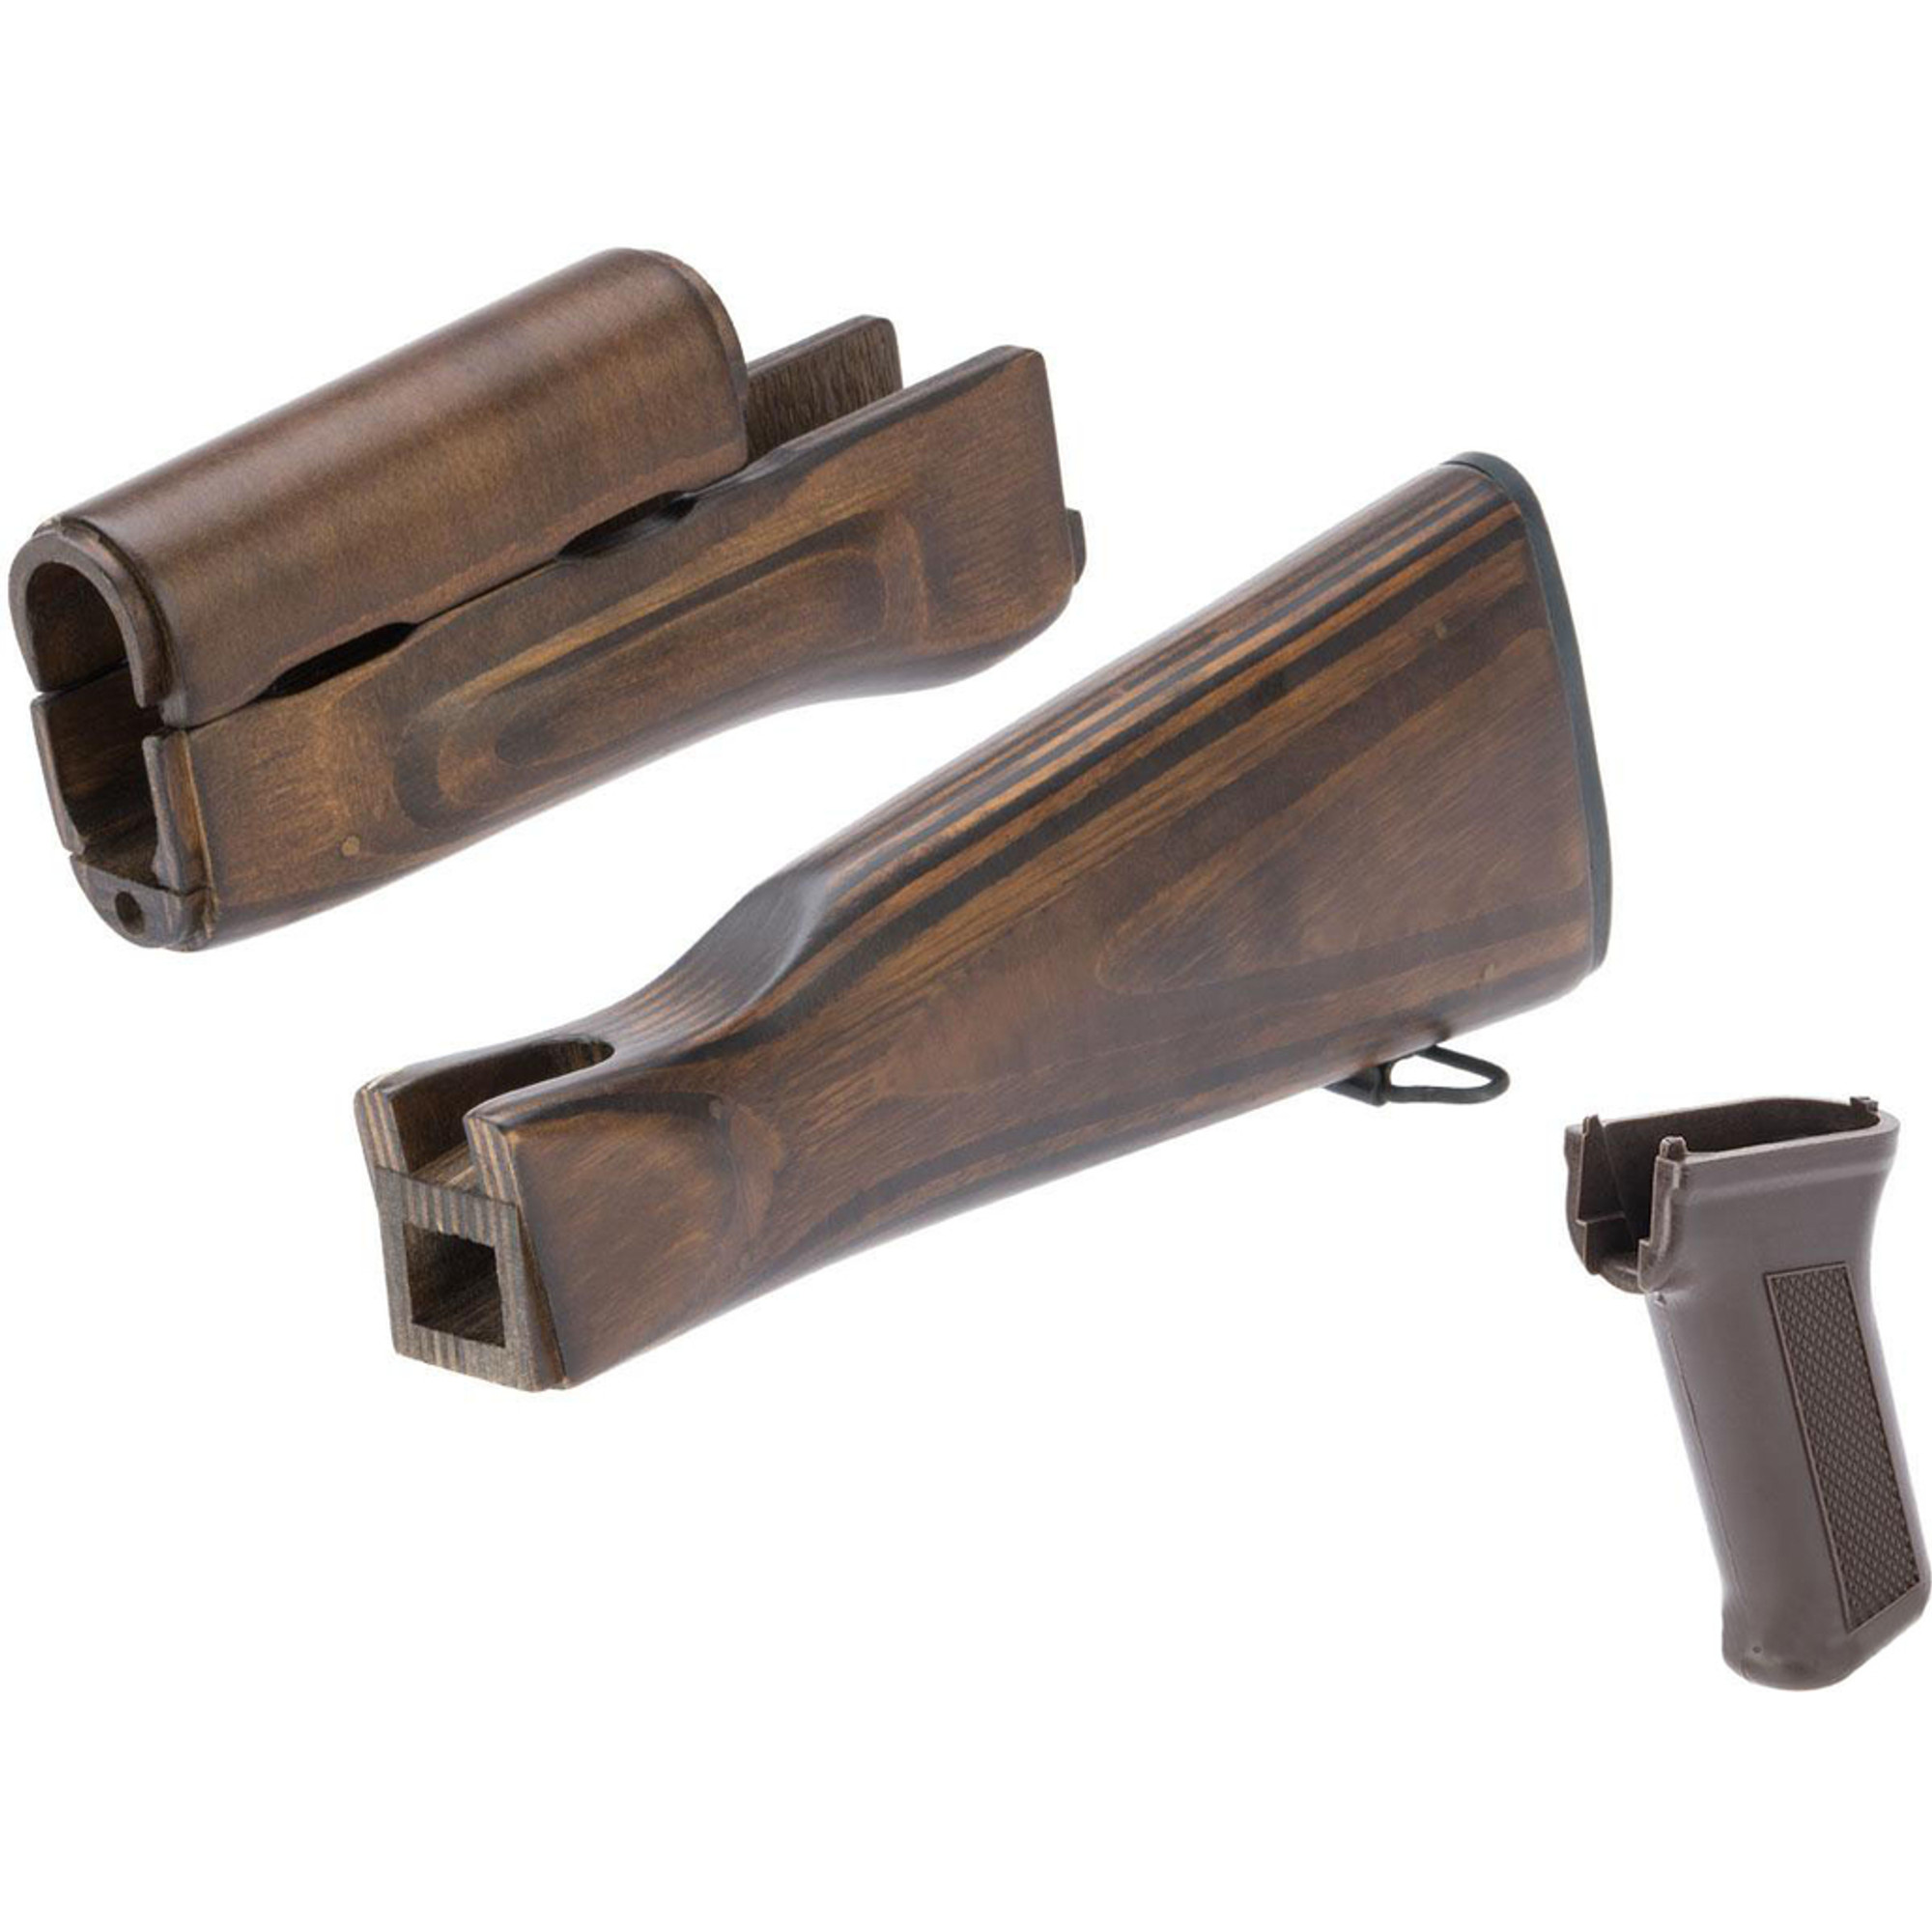 LCT Airsoft Wooden Stock and Grip Set for LCKM Series Airsoft Rifles (Color: Vintage)